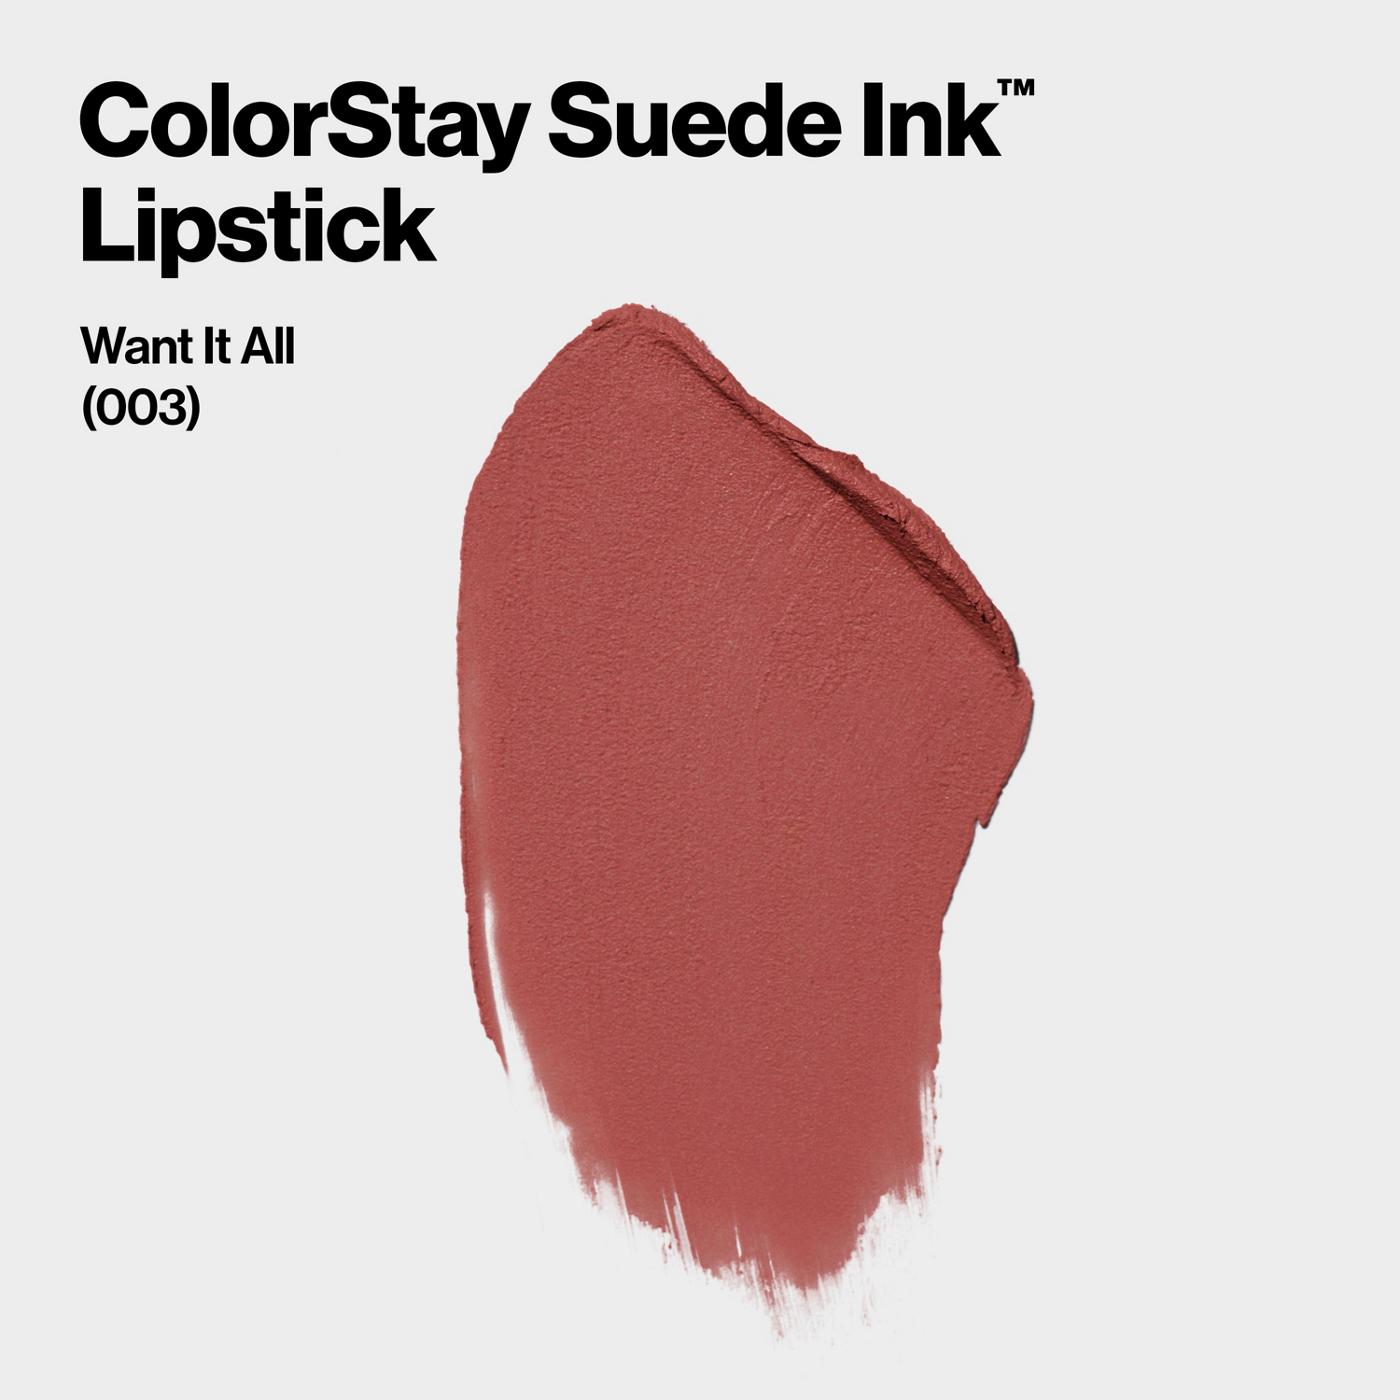 Revlon ColorStay Suede Ink Lipstick - Want It All; image 4 of 5